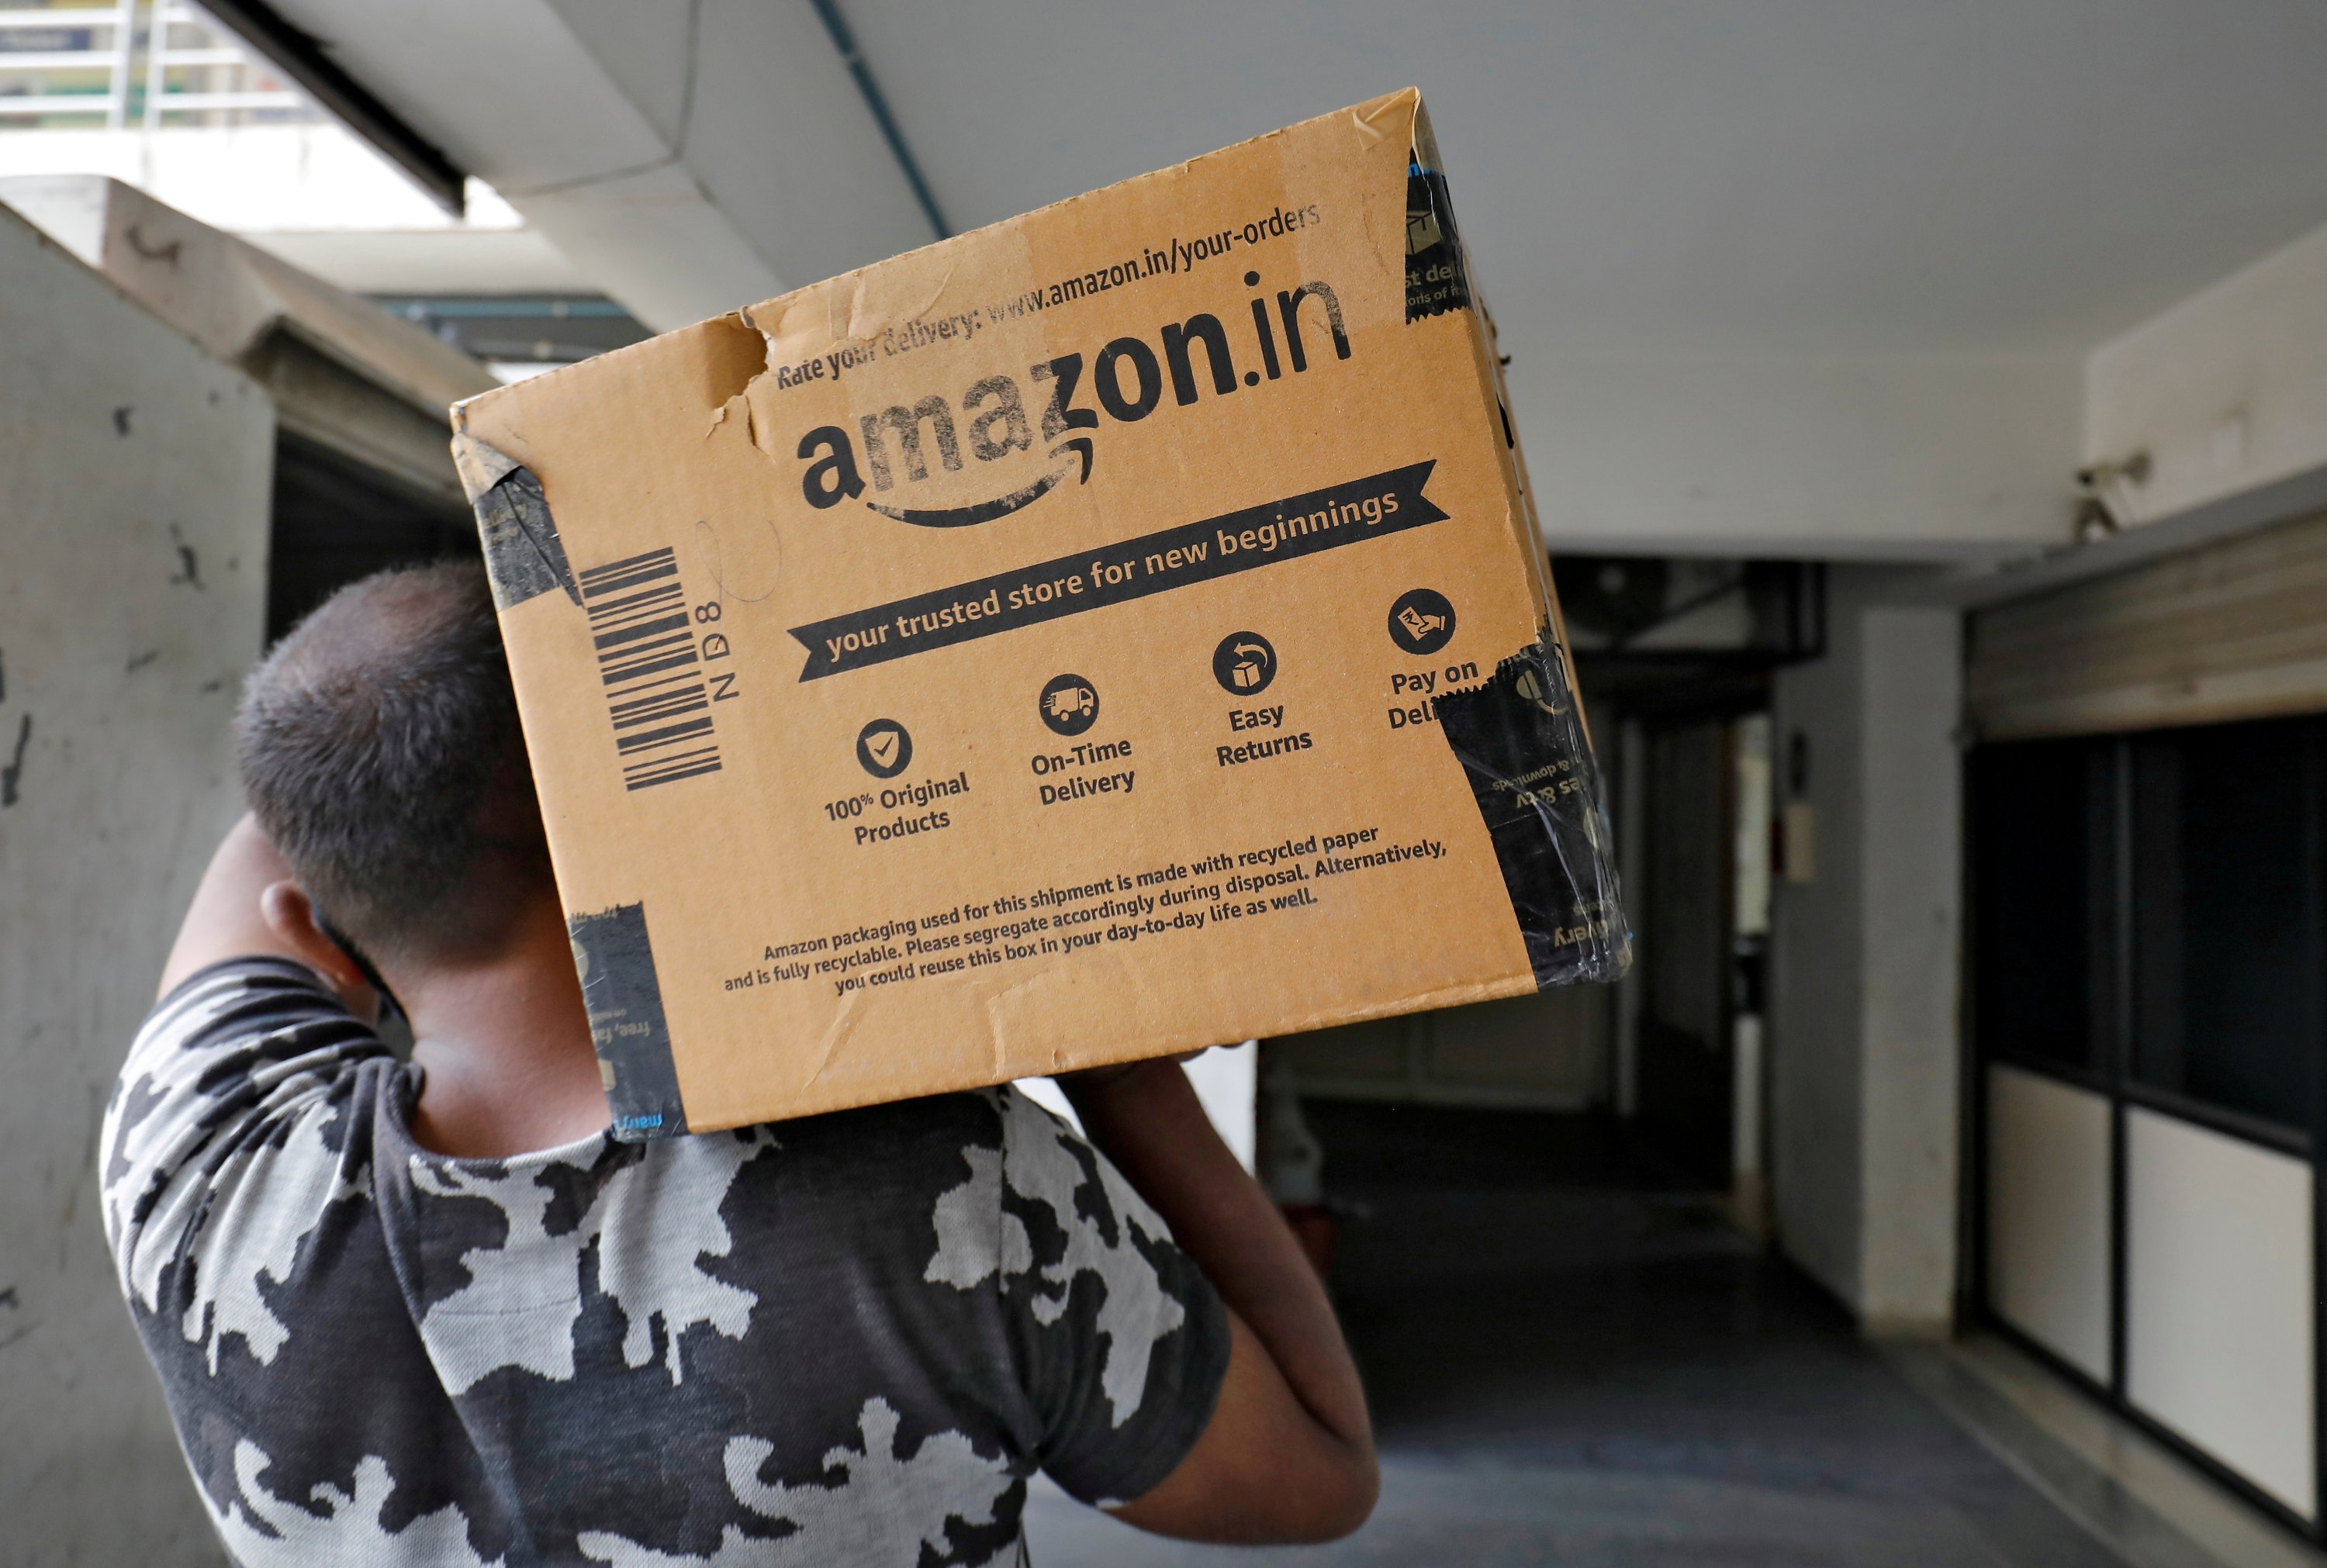 Amazon, Tata say Indian govt e-commerce rules will hit businesses